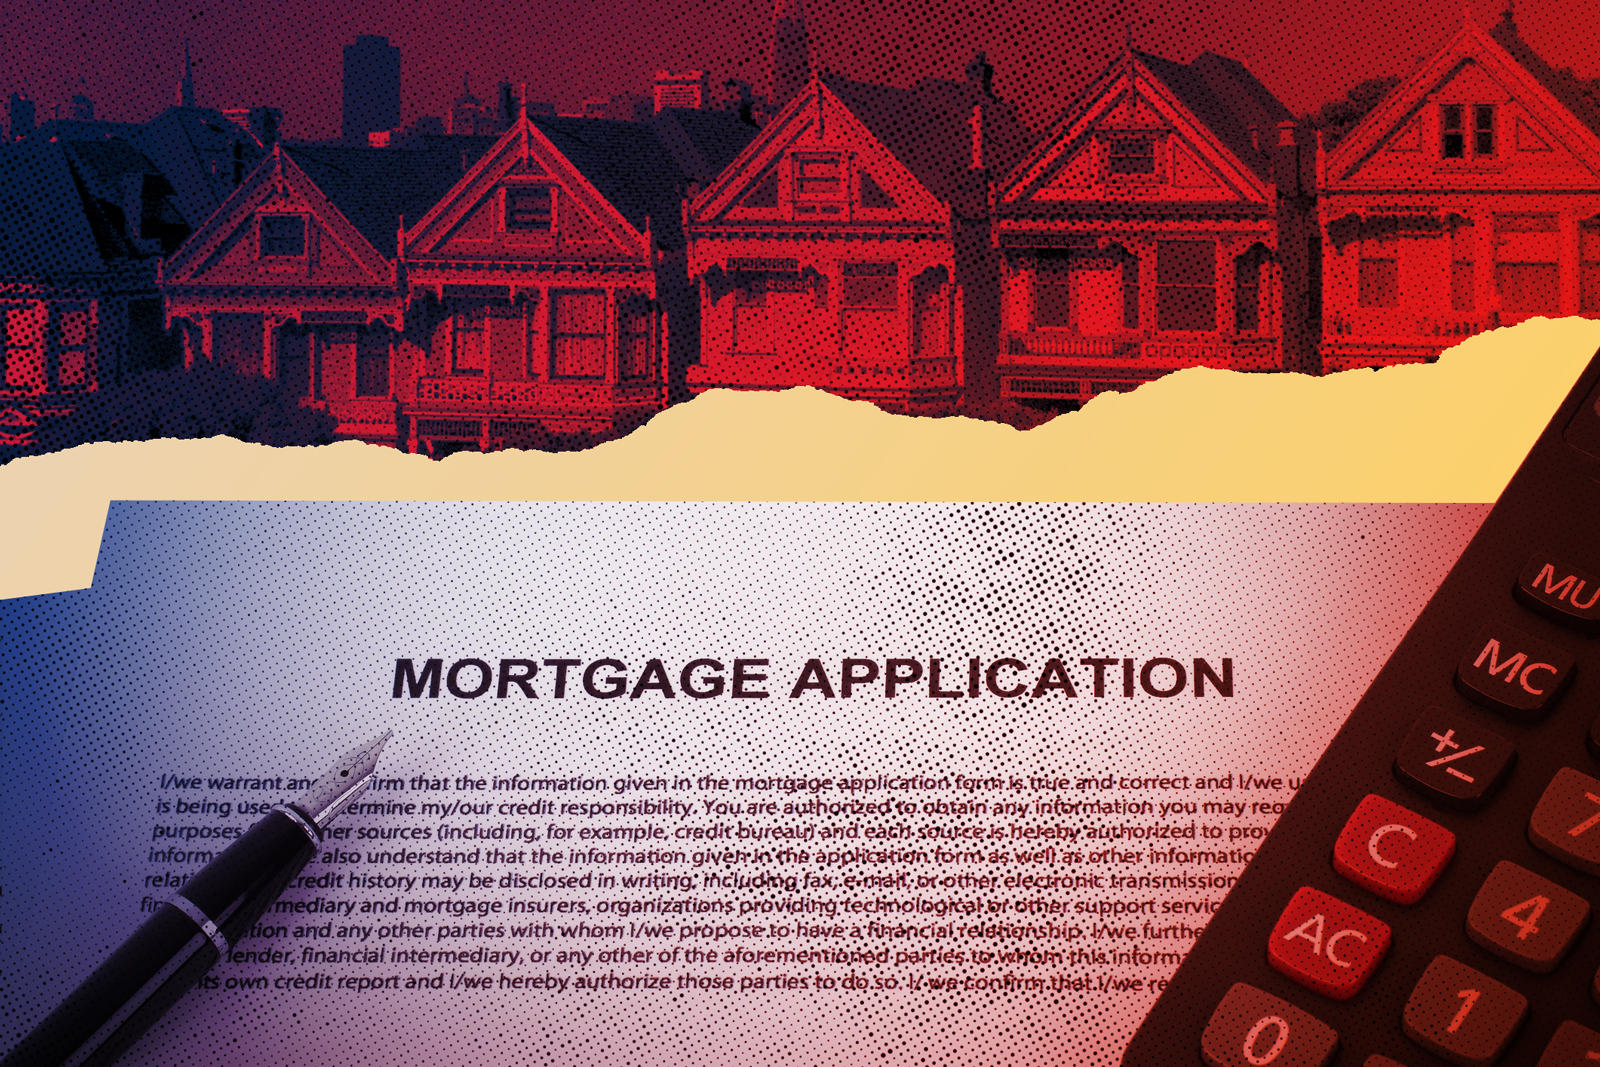 An increase in mortgage applications came despite interest rates ticking up (iStock)